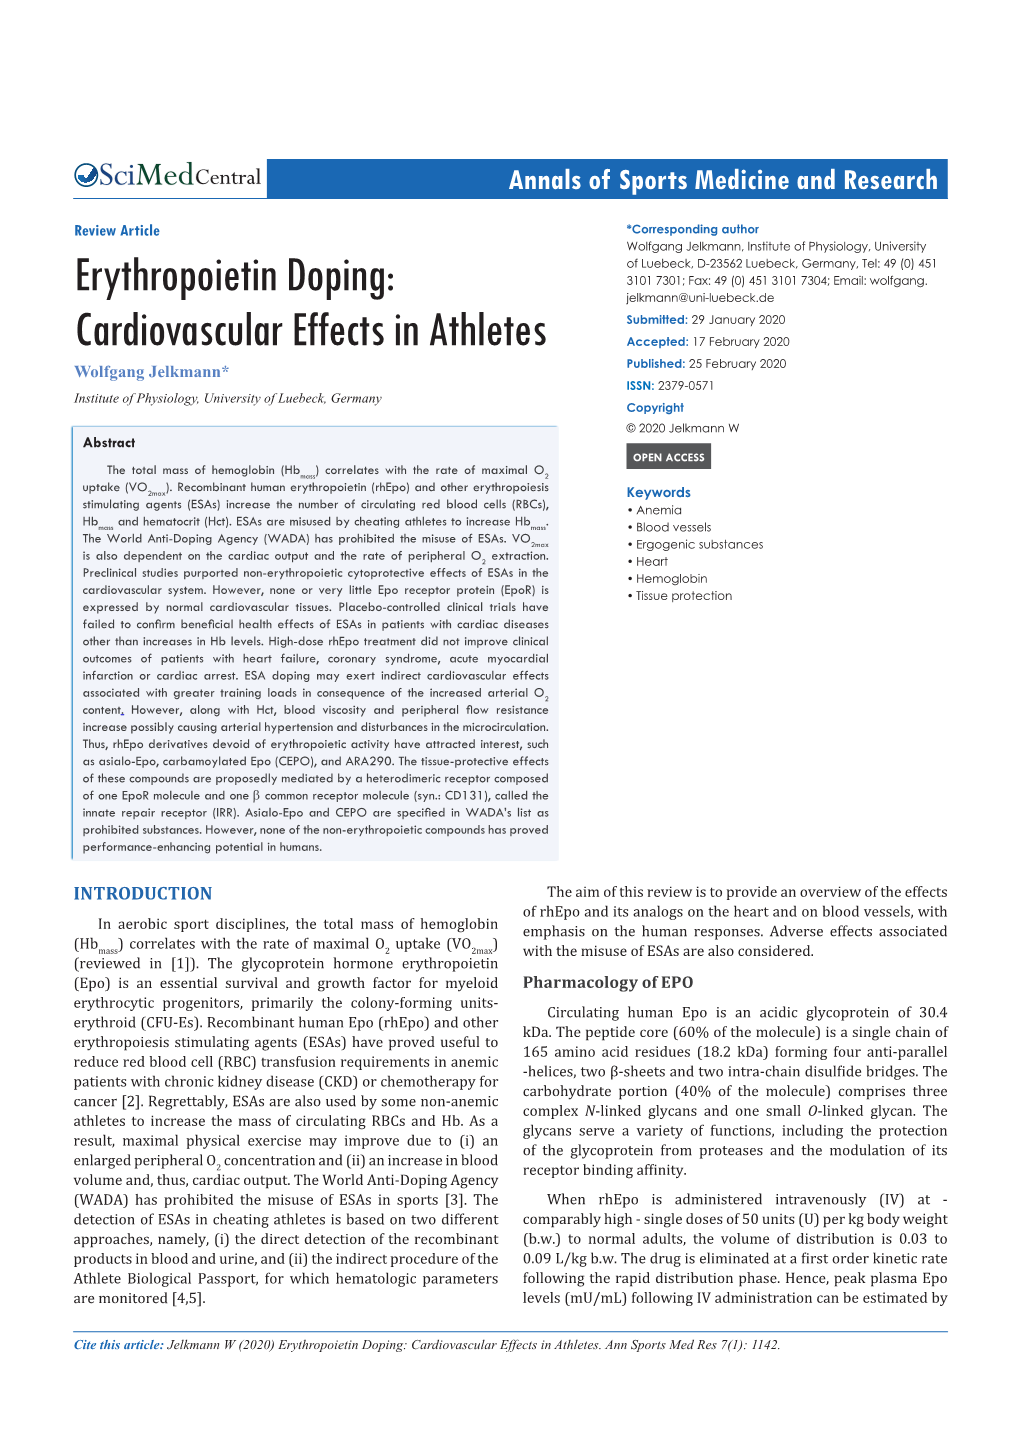 Erythropoietin Doping: 3101 7301; Fax: 49 (0) 451 3101 7304; Email: Wolfgang